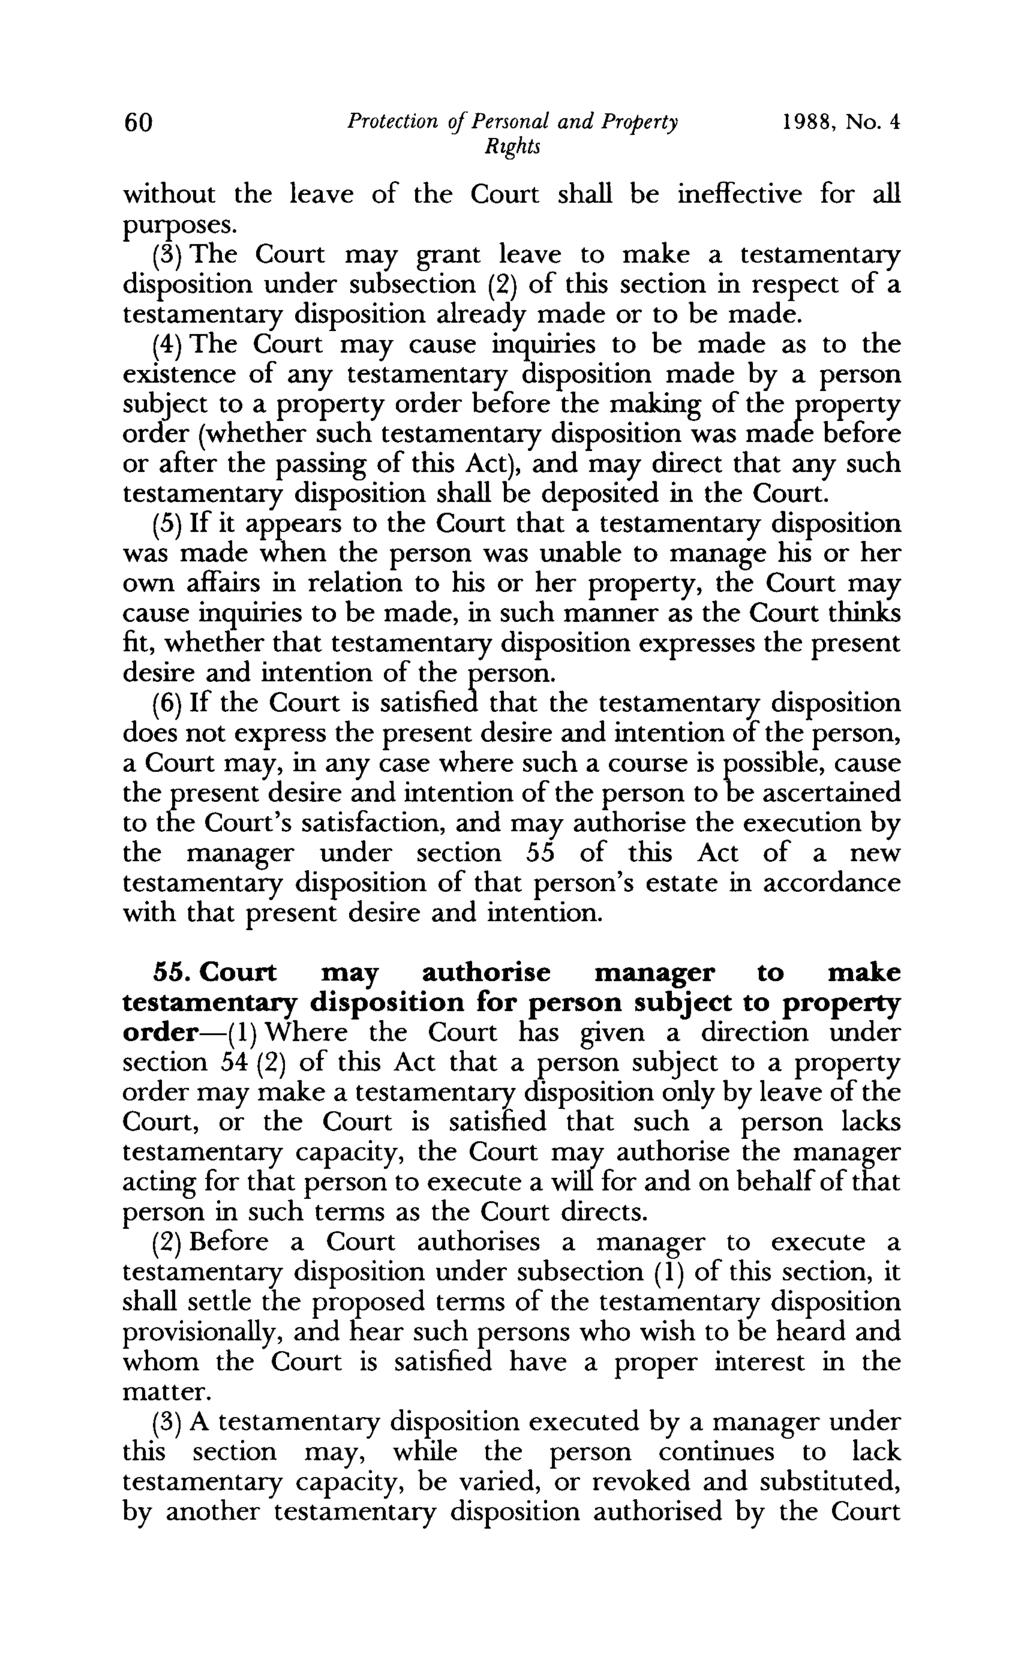 60 Protection of Personal and Property RIghts 1988, No. 4 without the leave of the Court shall be ineffective for all purposes.